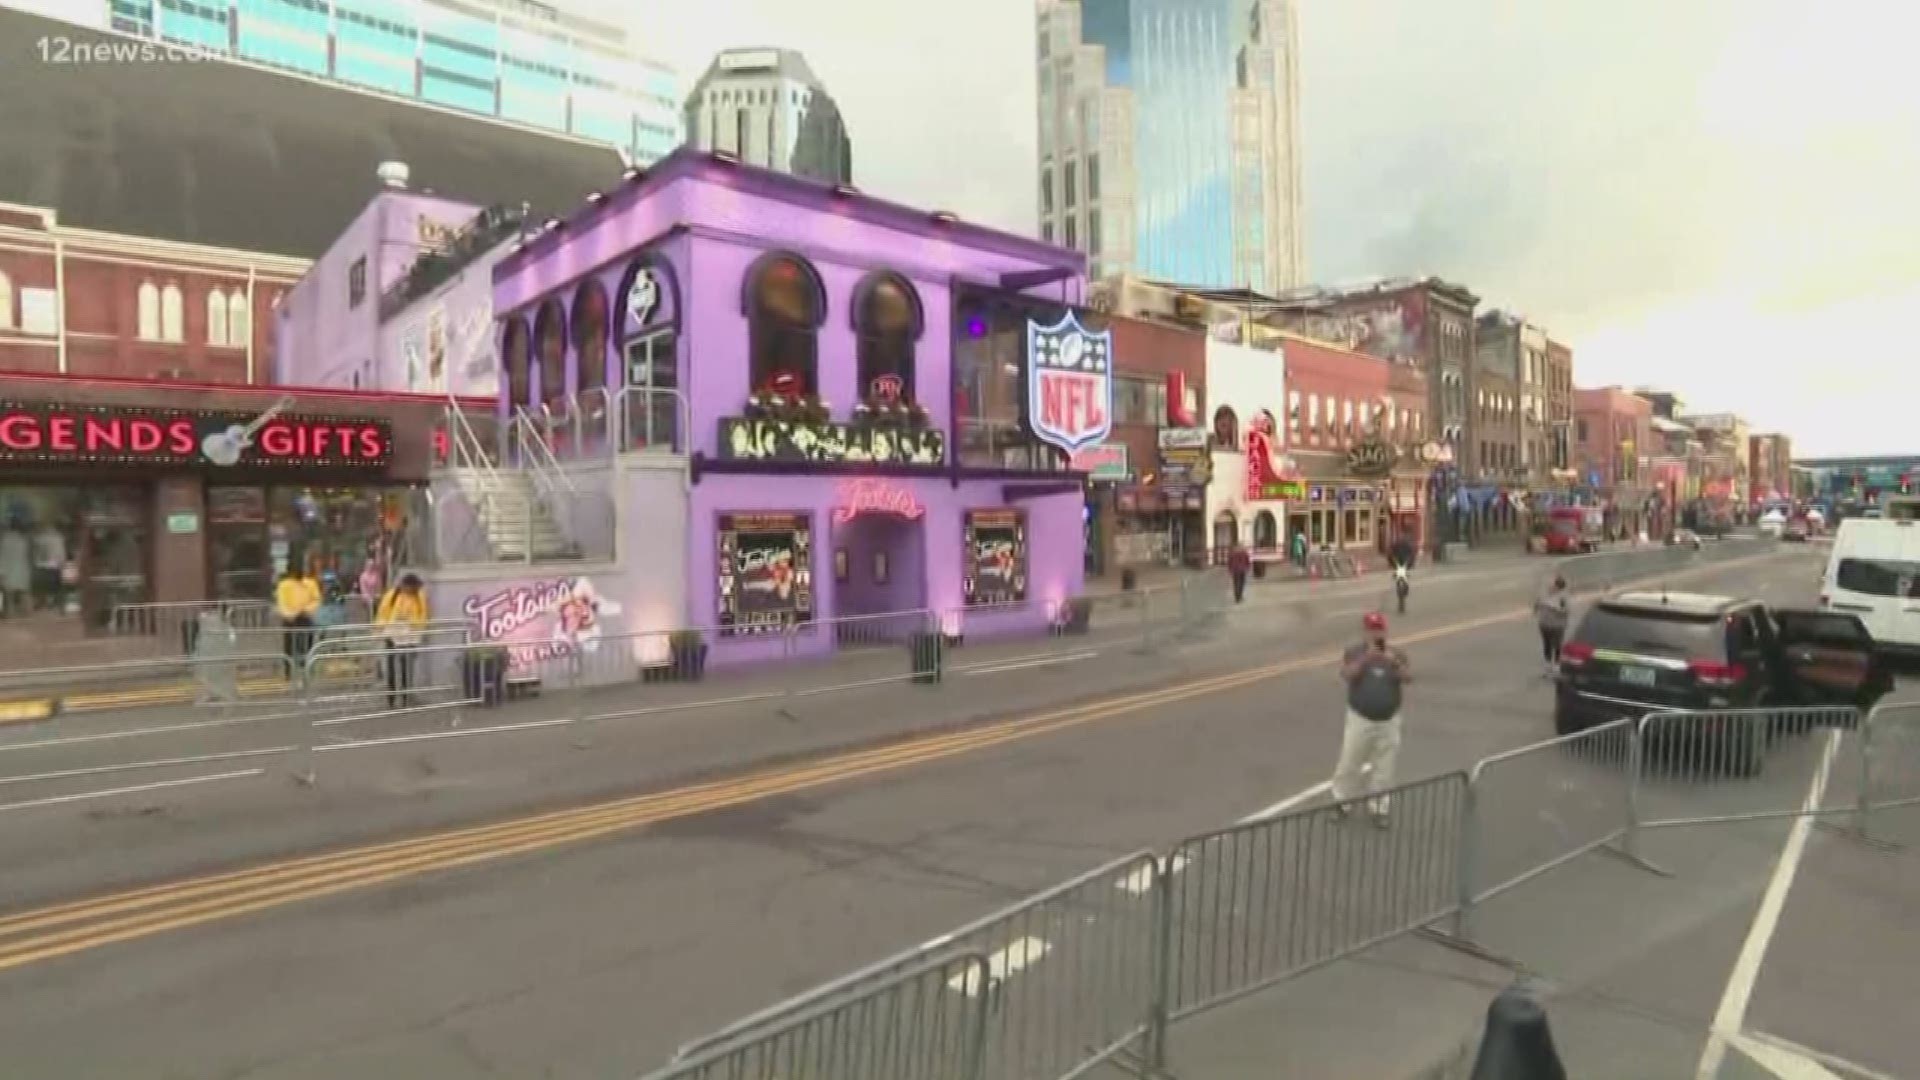 Paul Gerke hit the road to showcase some awesome travel destinations, and this week he makes a stop in Nashville.